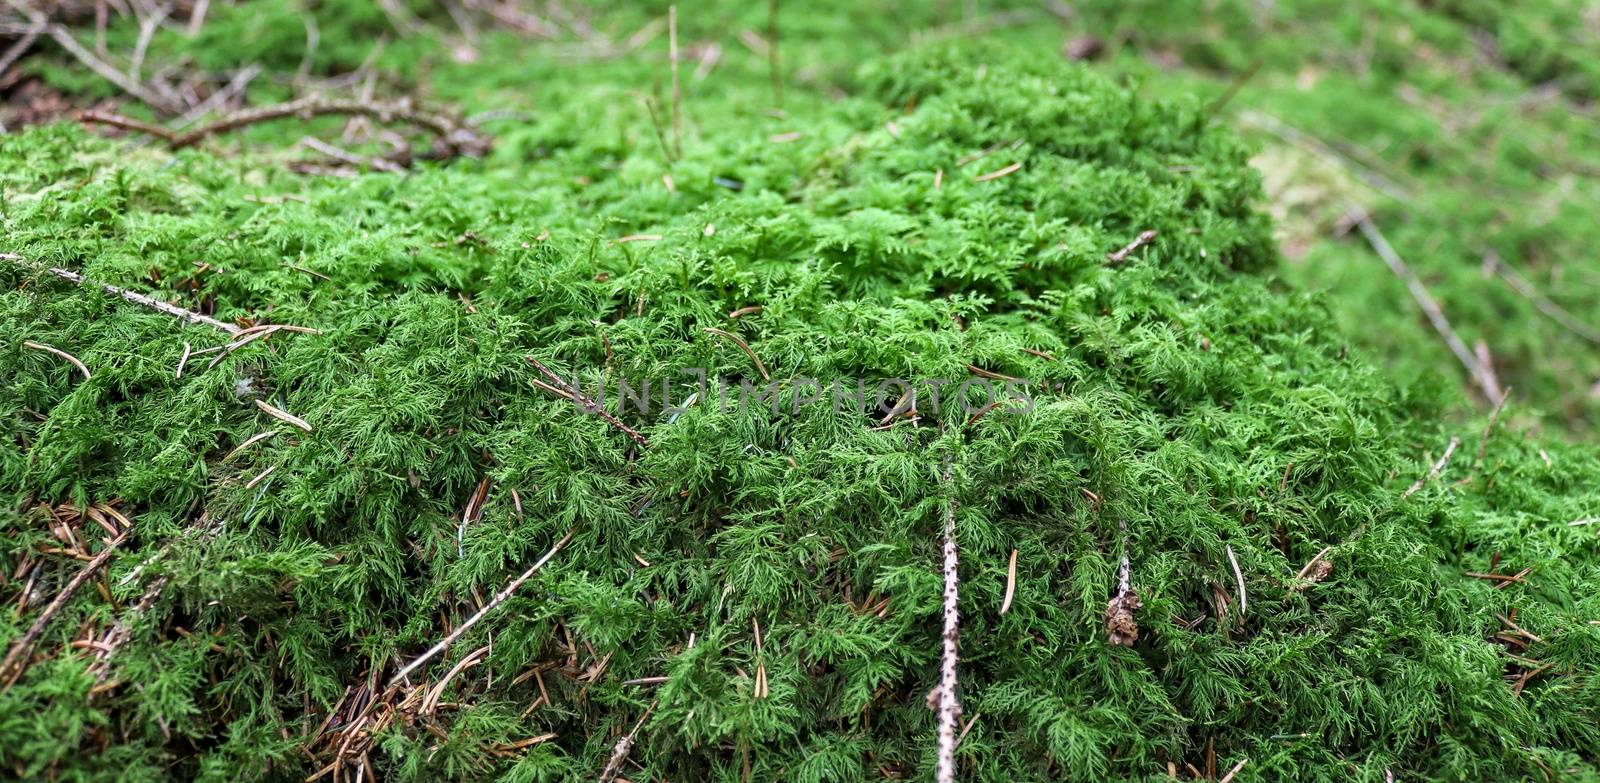 Detailed close up view at different moss textures on a forest gr by MP_foto71